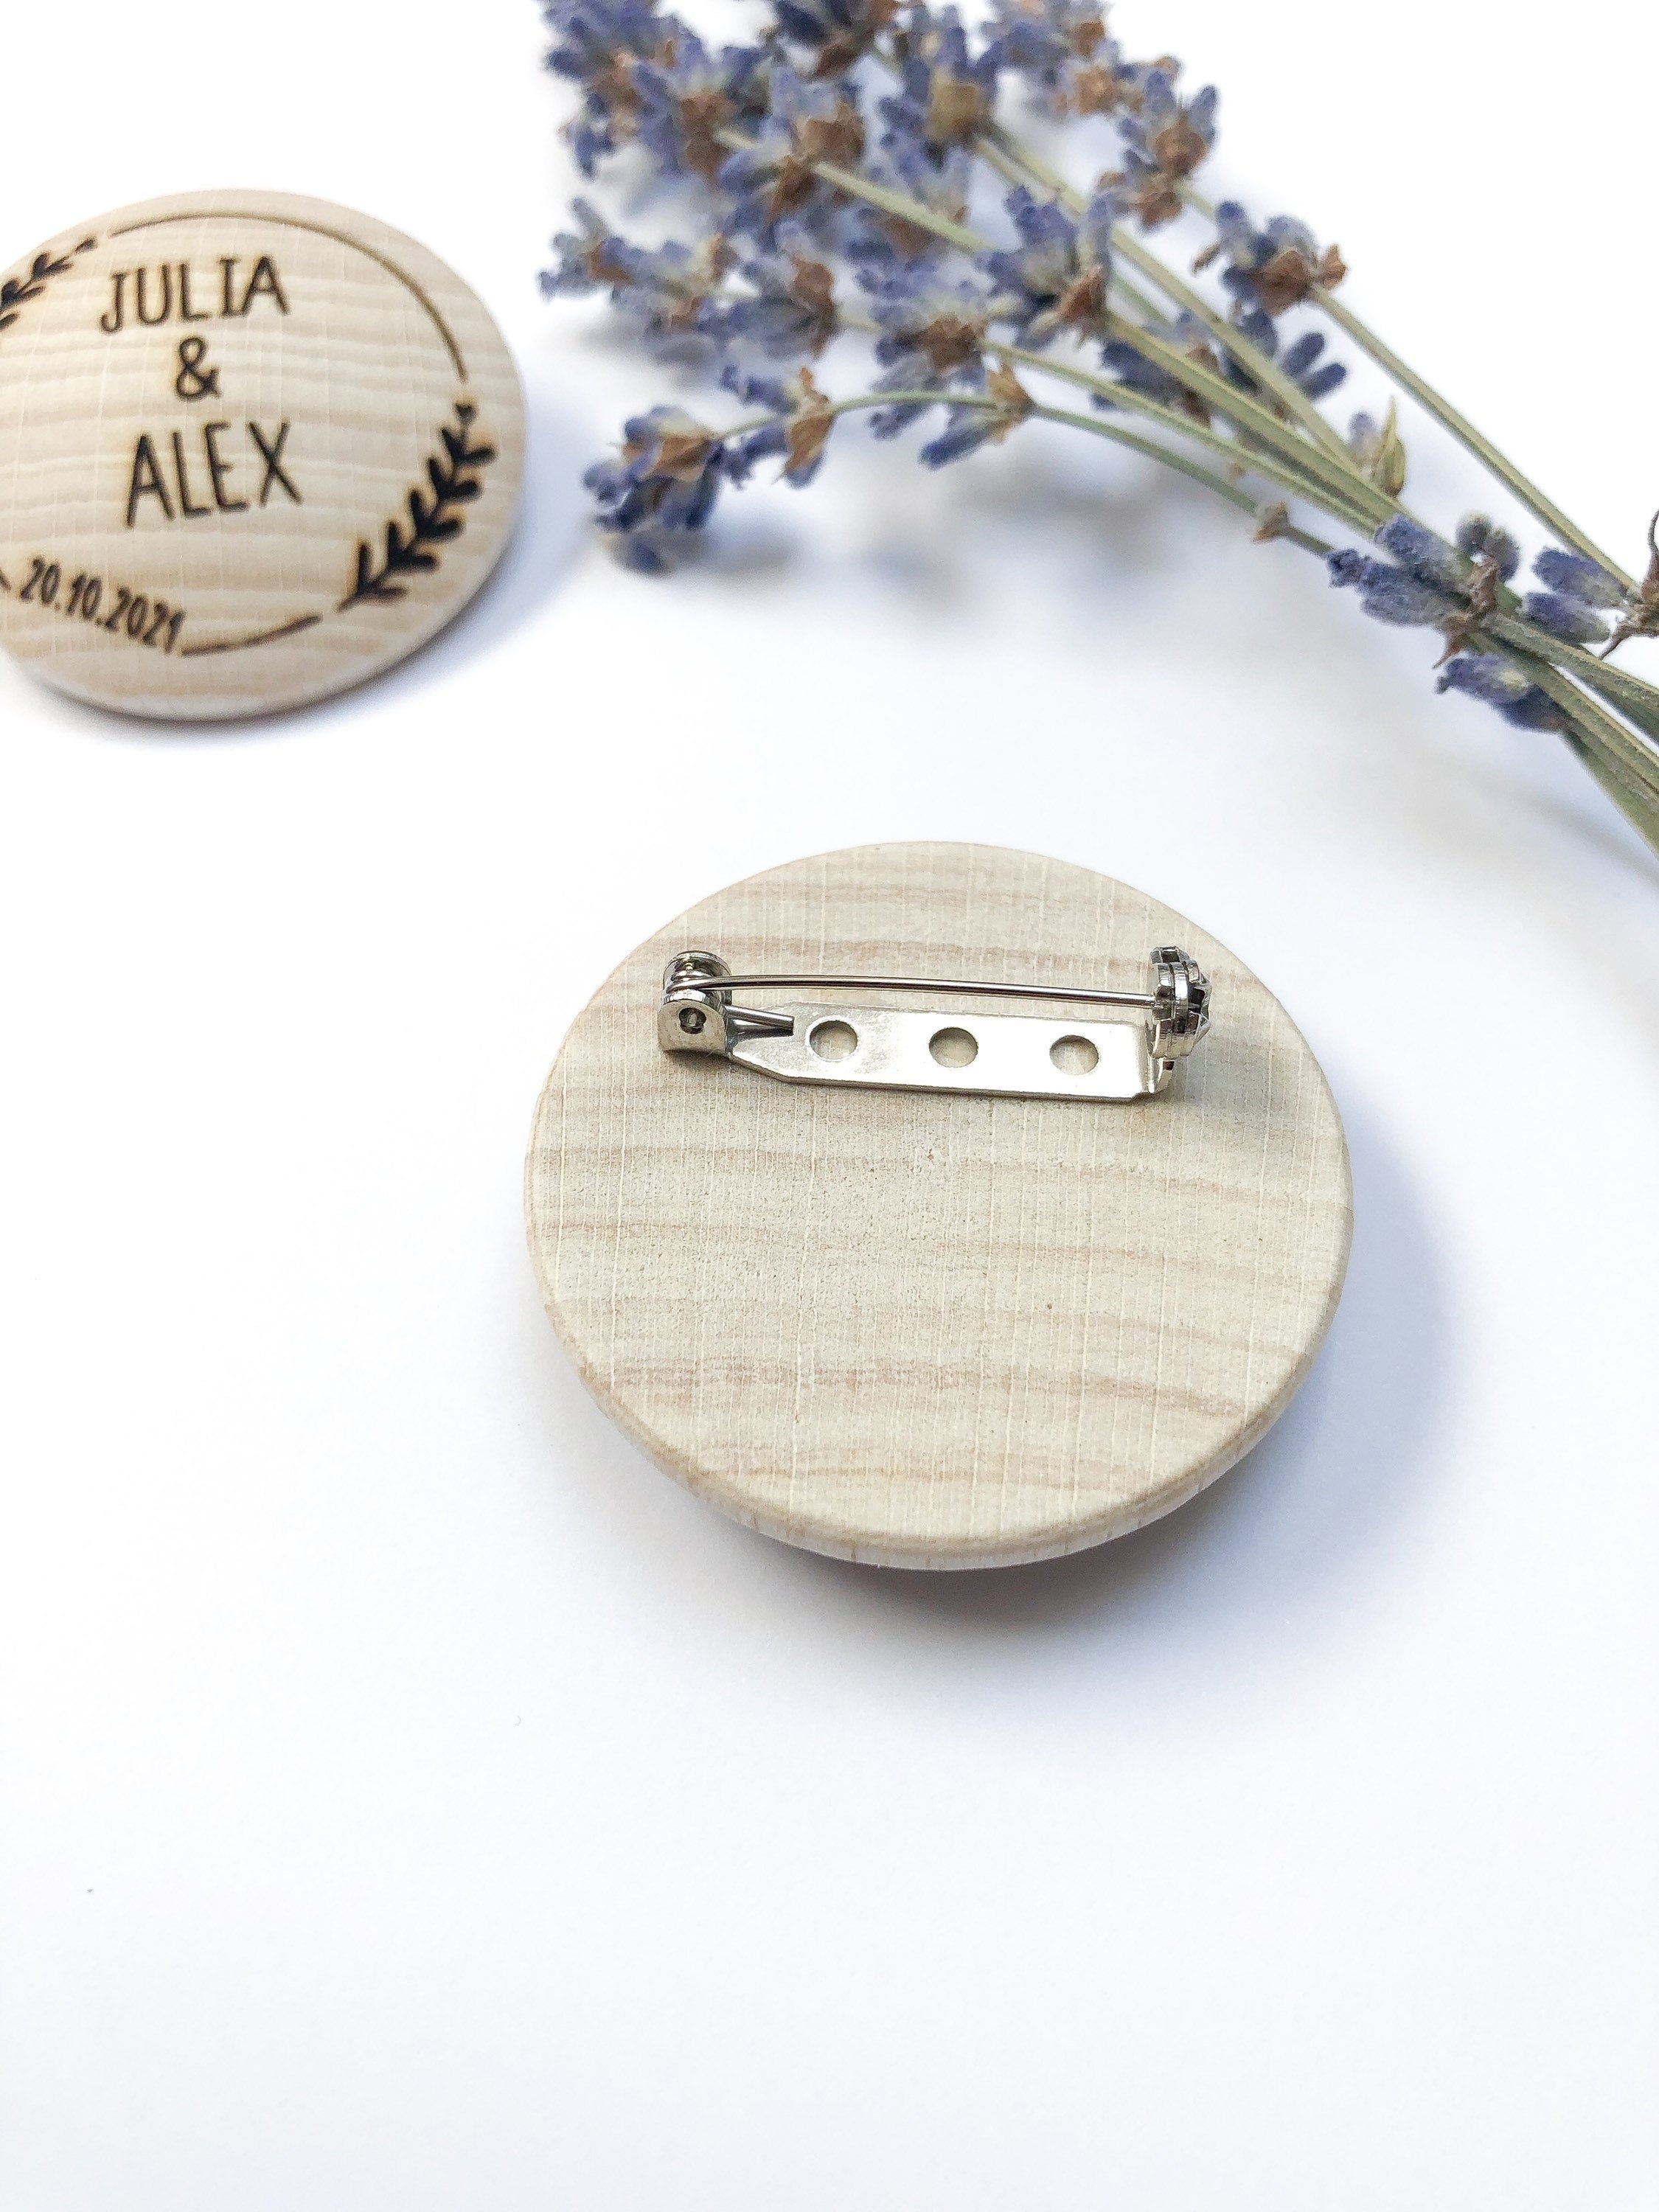 Personalized round wedding pin in wood